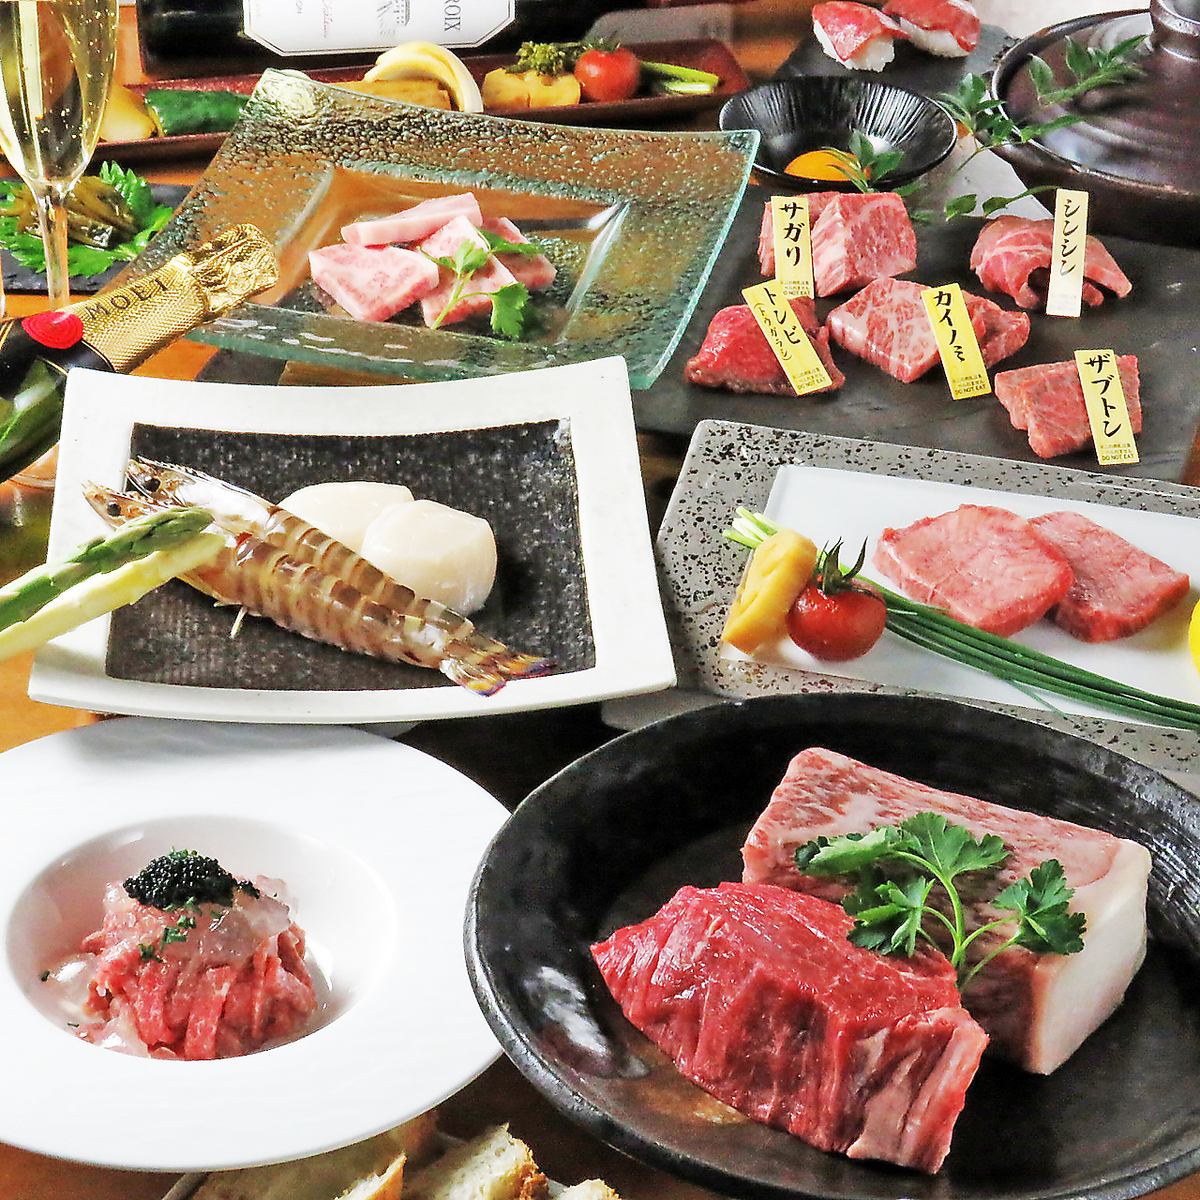 Be sure to have a welcome and farewell party at ``Sumiyaki Yakiniku Buchi Shunan Branch'' where you can enjoy the highest quality Kuroge Wagyu beef!